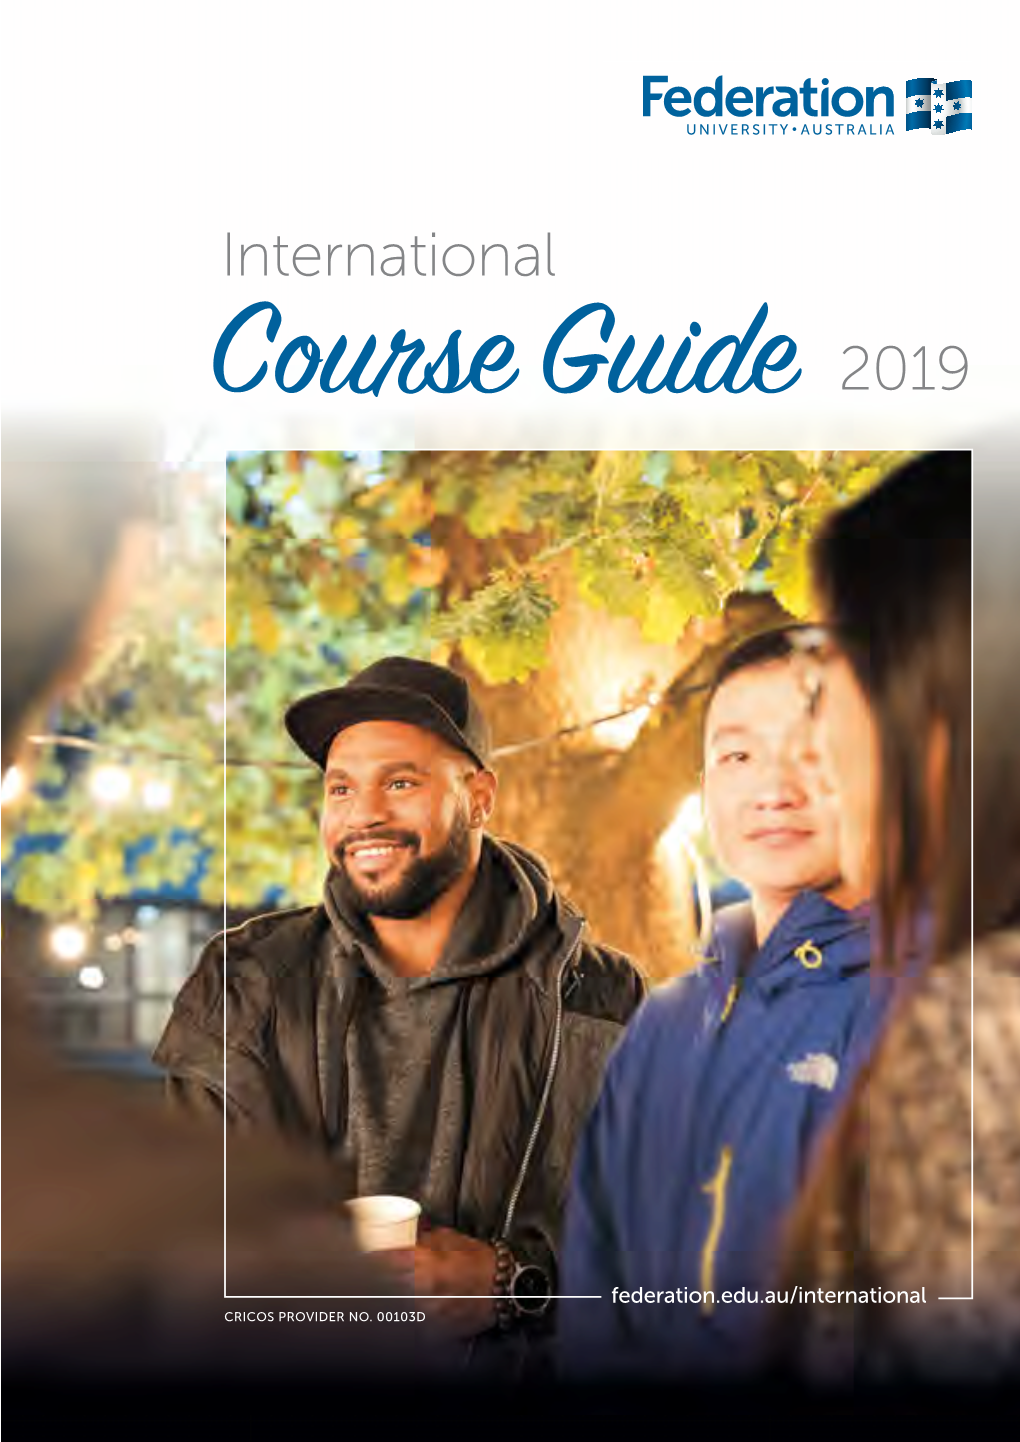 International Course Guide 2019